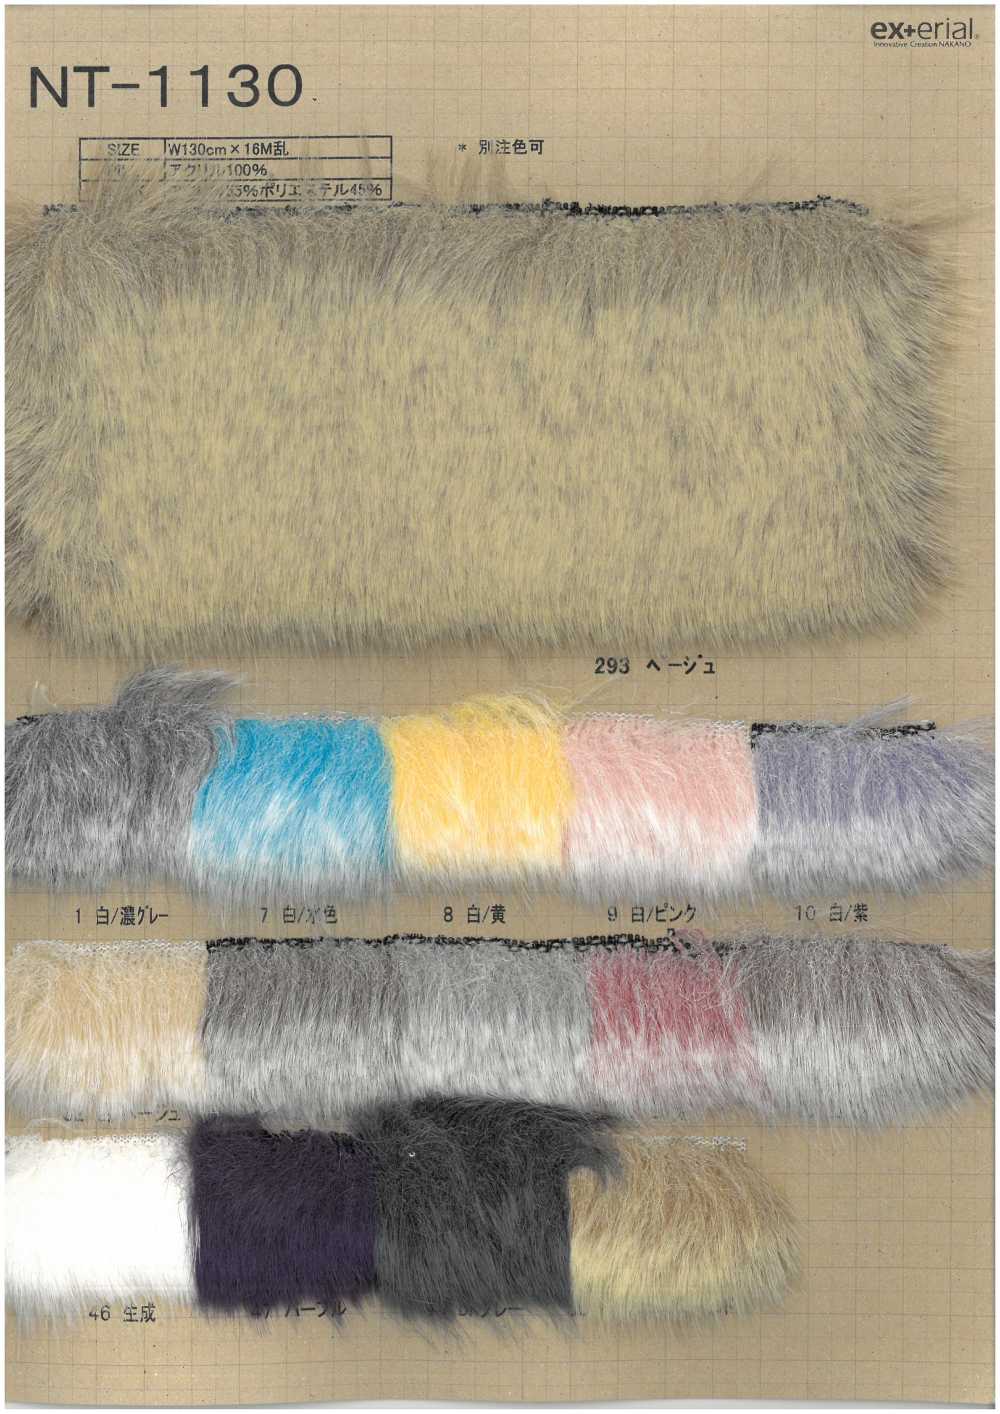 NT-1130 Craft Fur [Silver Fox][Textile / Fabric] Nakano Stockinette Industry